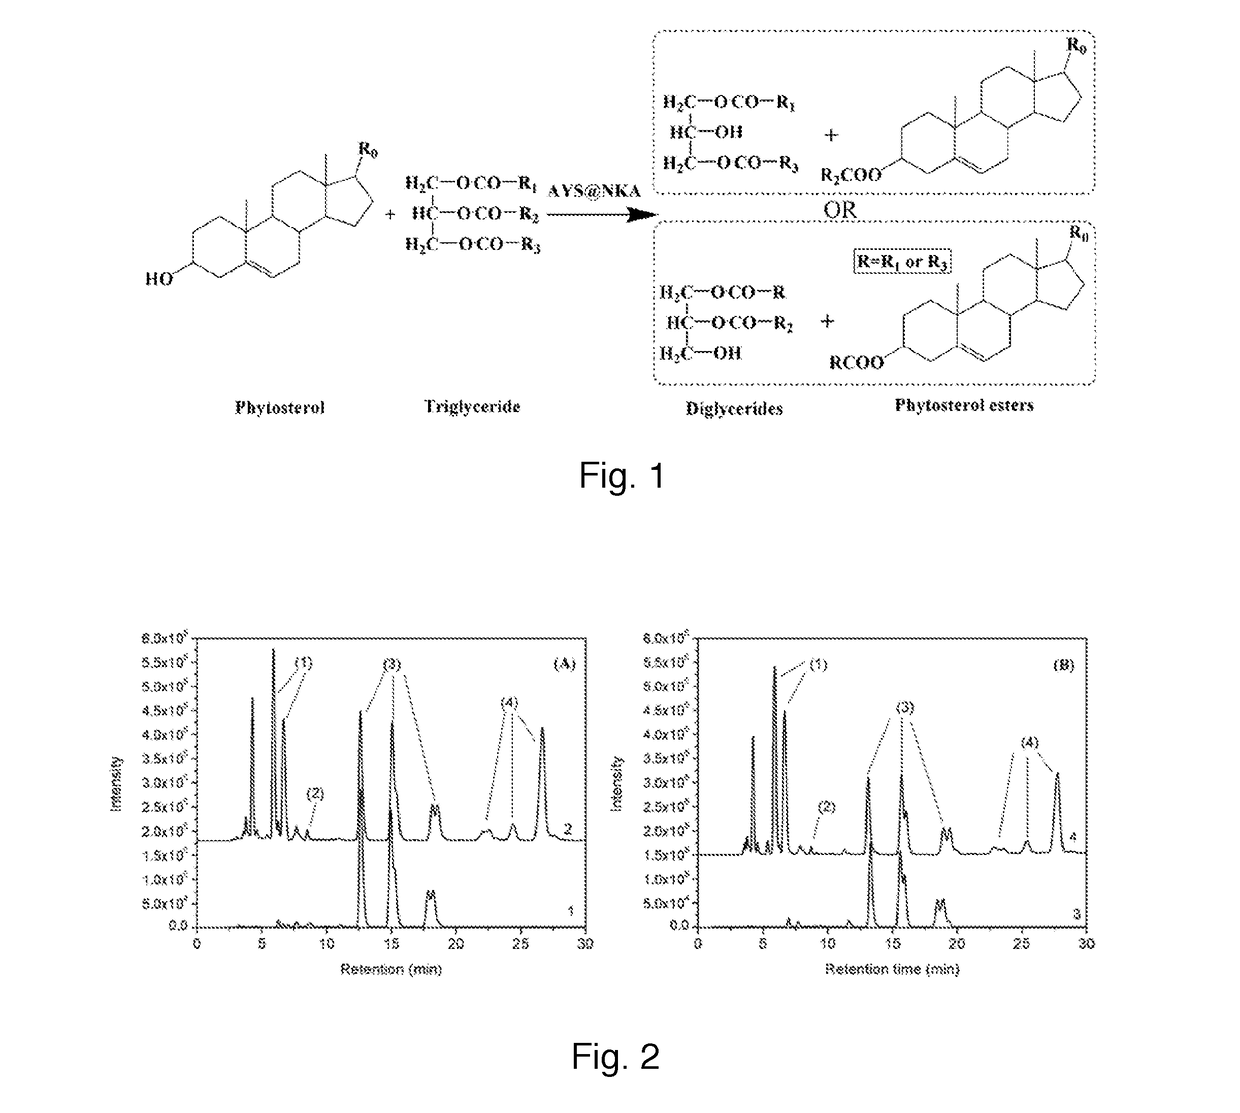 Method for preparing functional edible oil rich in phytosterol esters and diglycerides